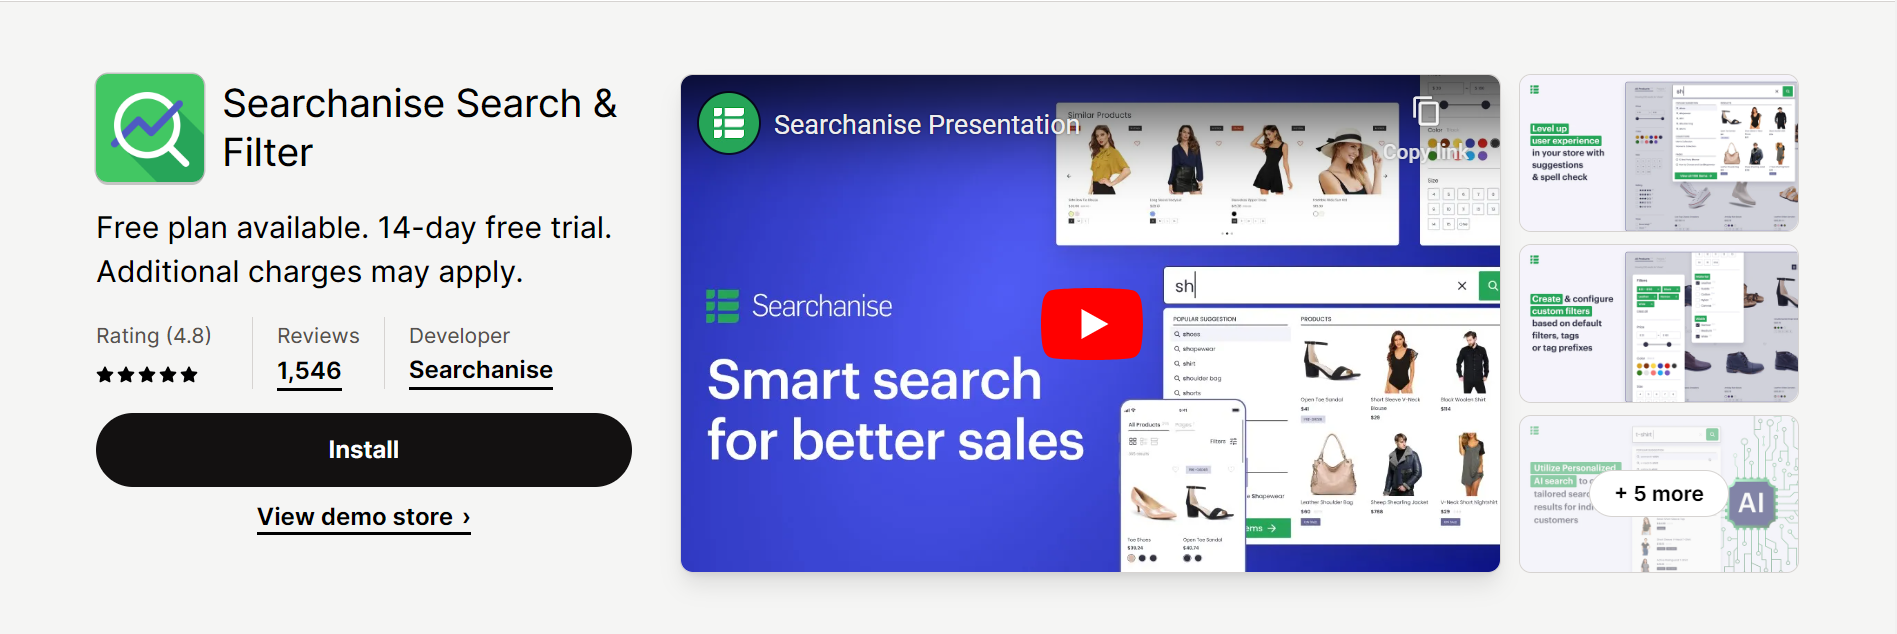 Searchanise Search & Filter